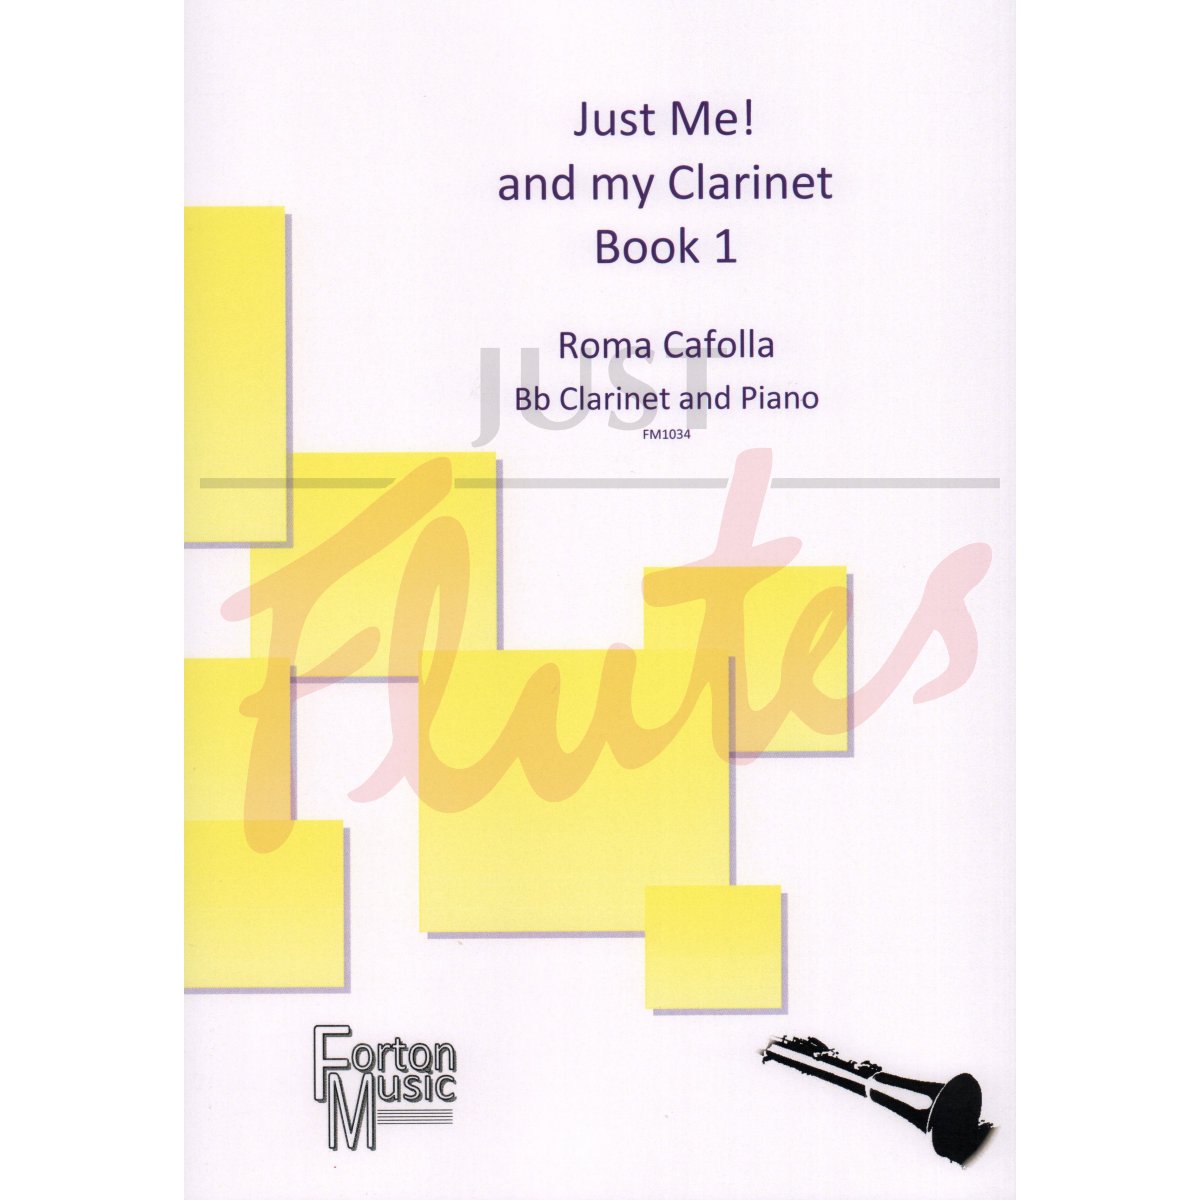 Just Me! and my Clarinet, Book 1 for Clarinet and Piano